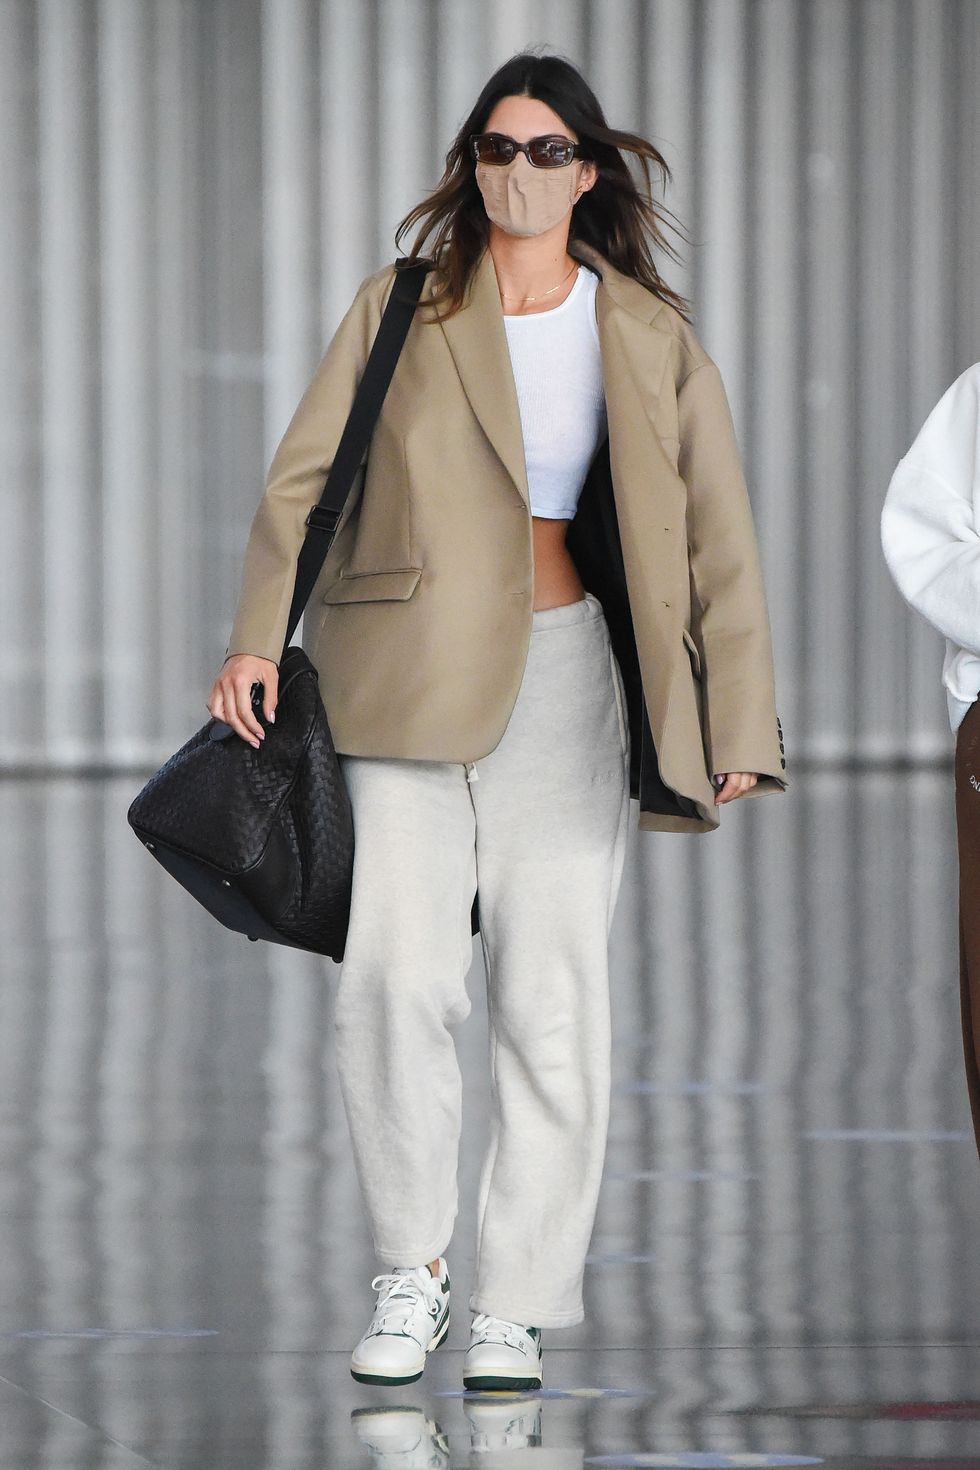 04242021 exclusive kendall jenner is pictured arriving at jfk airport in new york the 25 year old american model looked fresh faced after the overnight flight wearing a large sport coat over over a white crop top paired with beige joggers and white trainers kendall's arrival comes one day after receiving a 5 year restraining order against home intruder and her father caitlyn jenner announcing his run for california governor salestheimagedirectcom please bylinetheimagedirectcomexclusive please email salestheimagedirectcom for fees before use